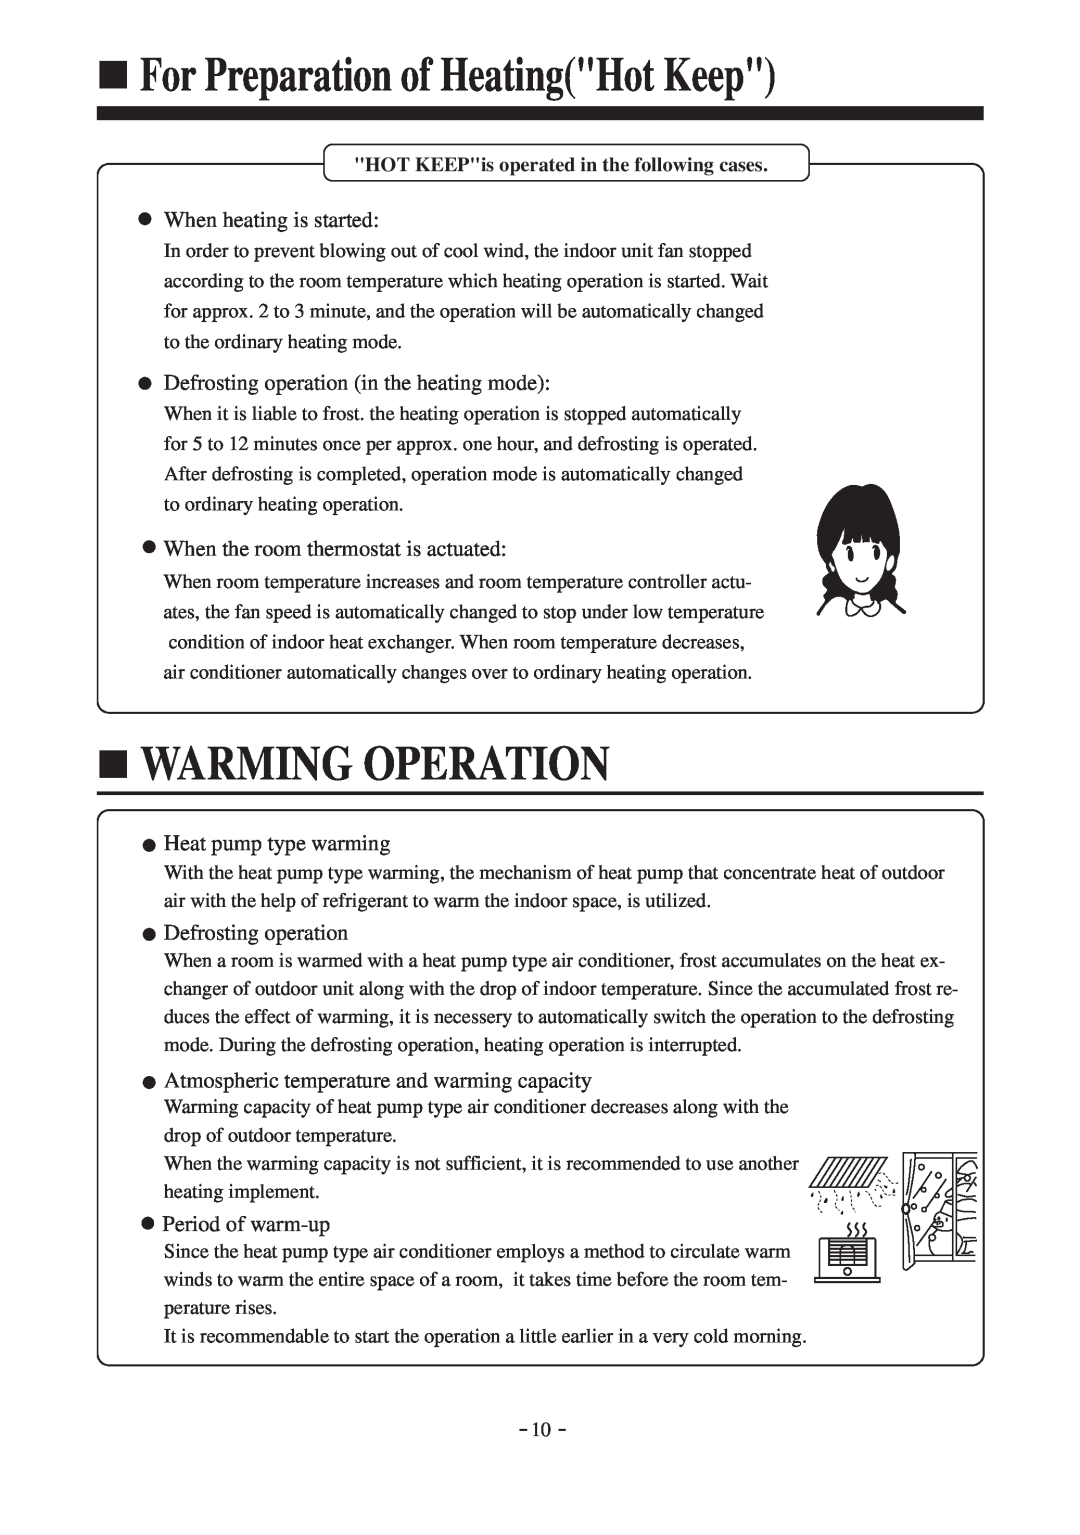 Haier AD36NAMBEA(ECO) For Preparation of HeatingHot Keep, Warming Operation, When heating is started, Defrosting operation 